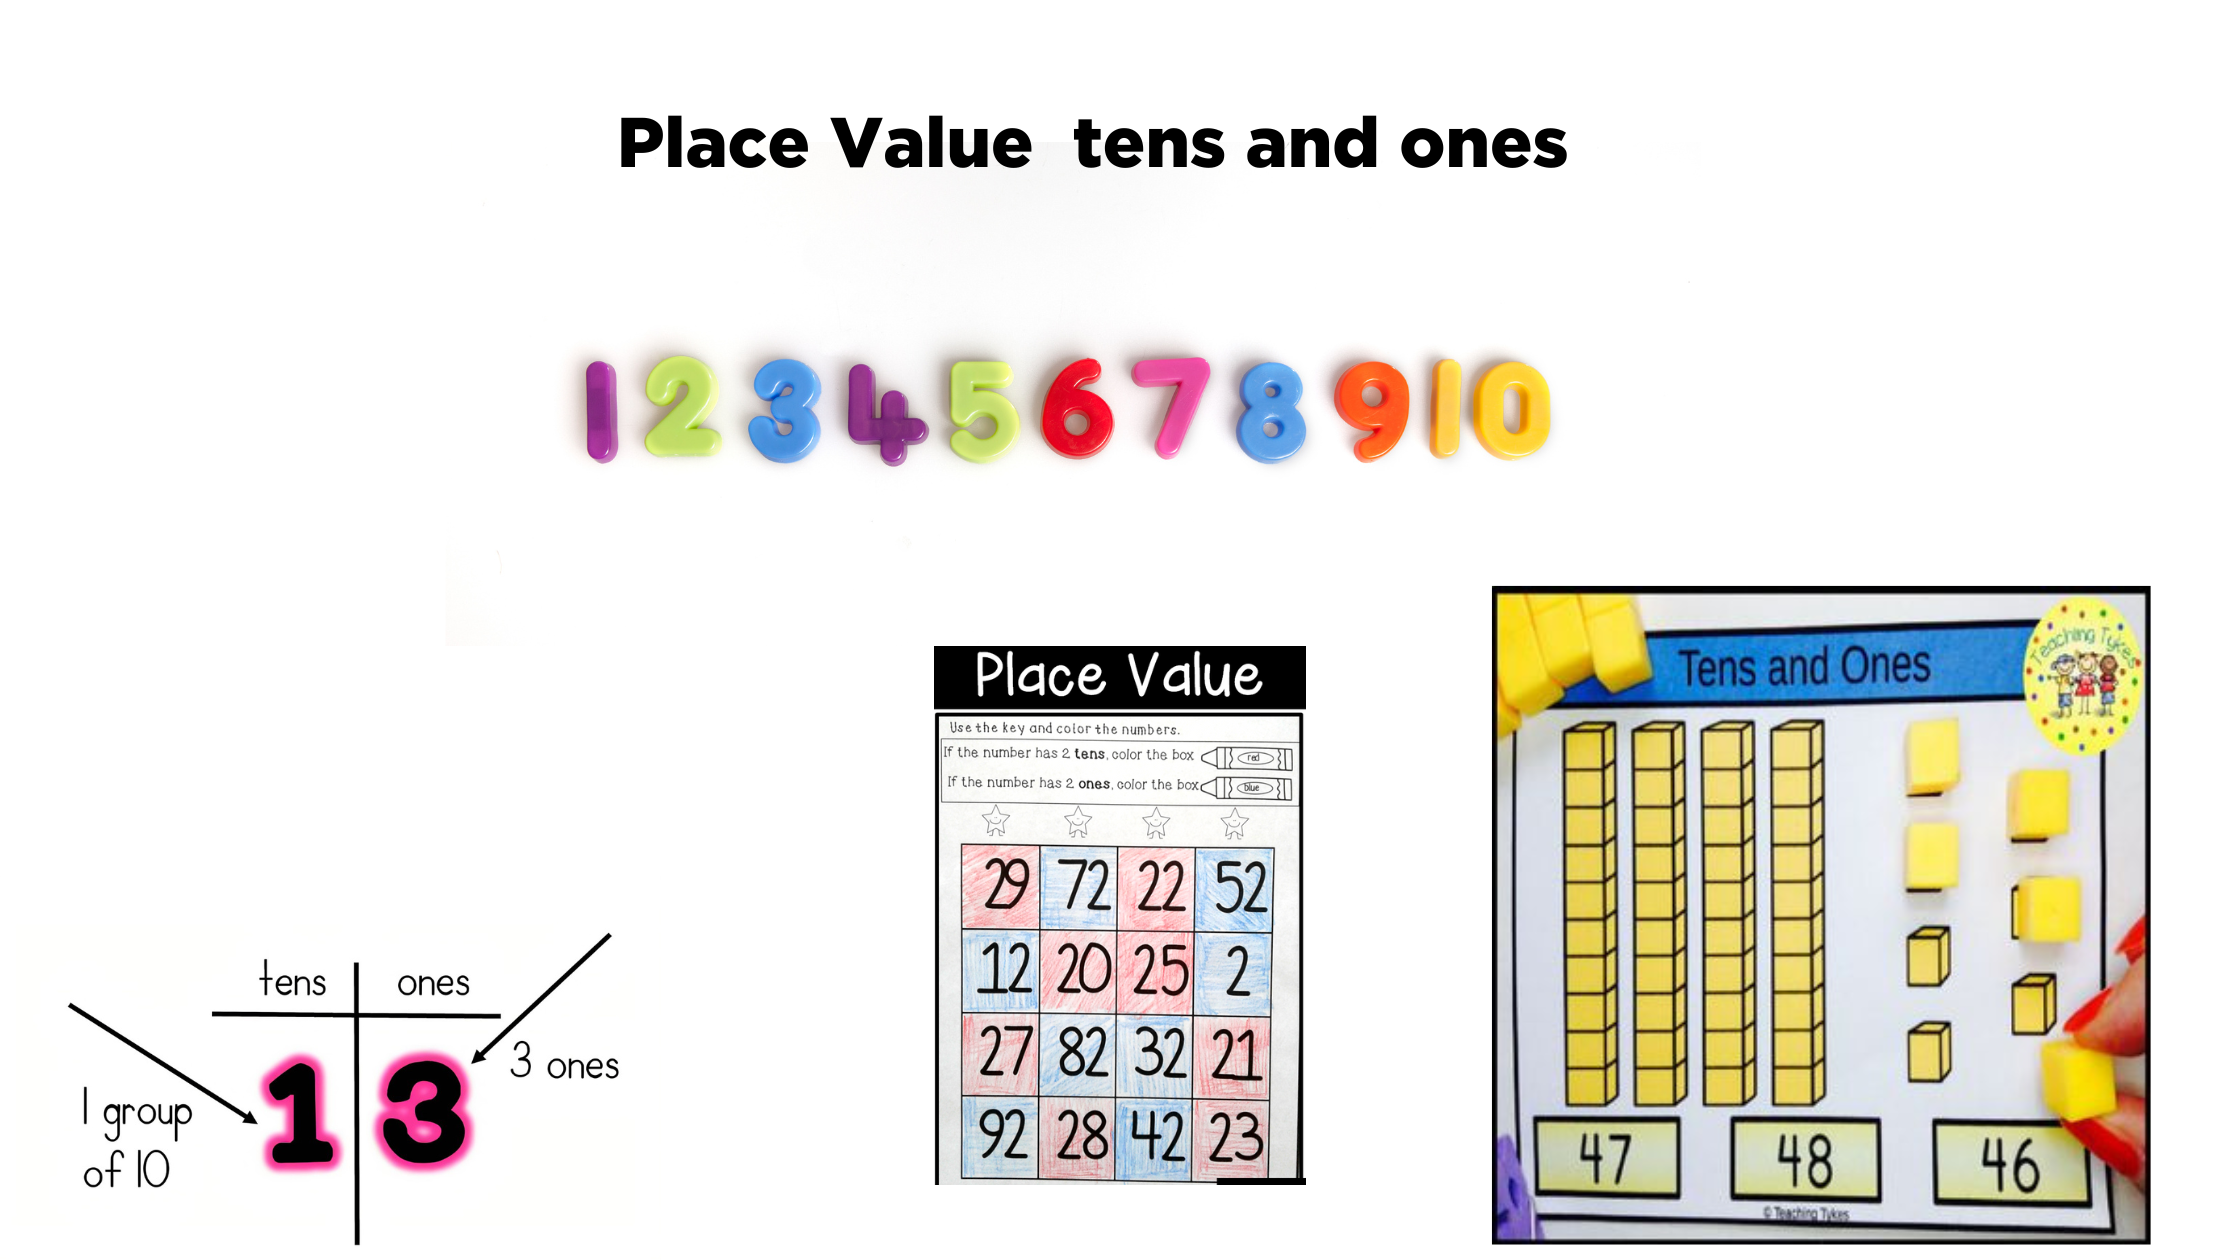 Place Value tens and ones